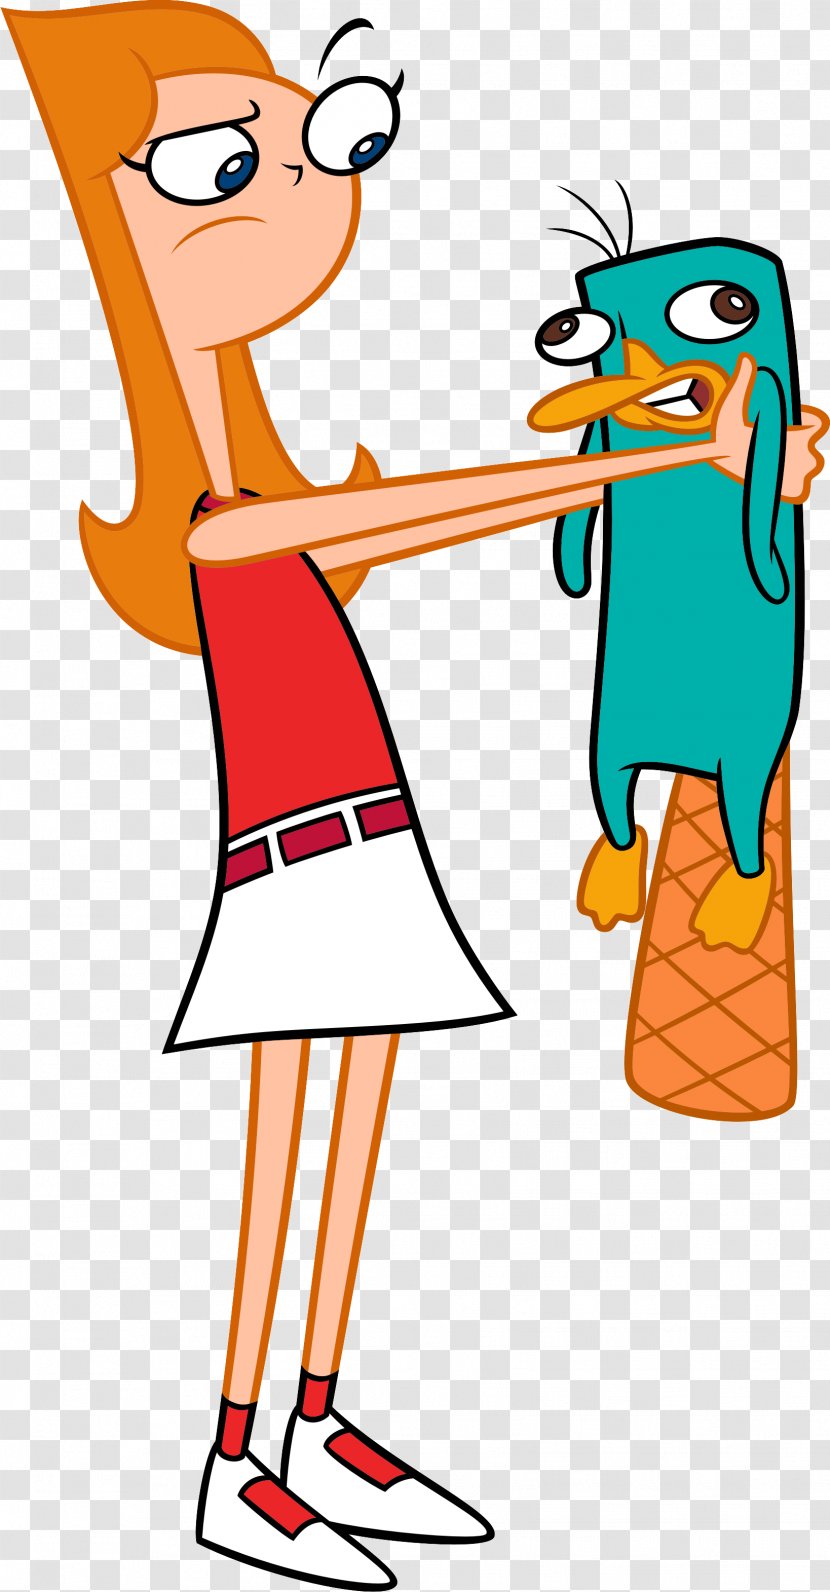 Candace Flynn Perry The Platypus Phineas Ferb Fletcher Isabella Garcia-Shapiro - Flower - And Transparent PNG